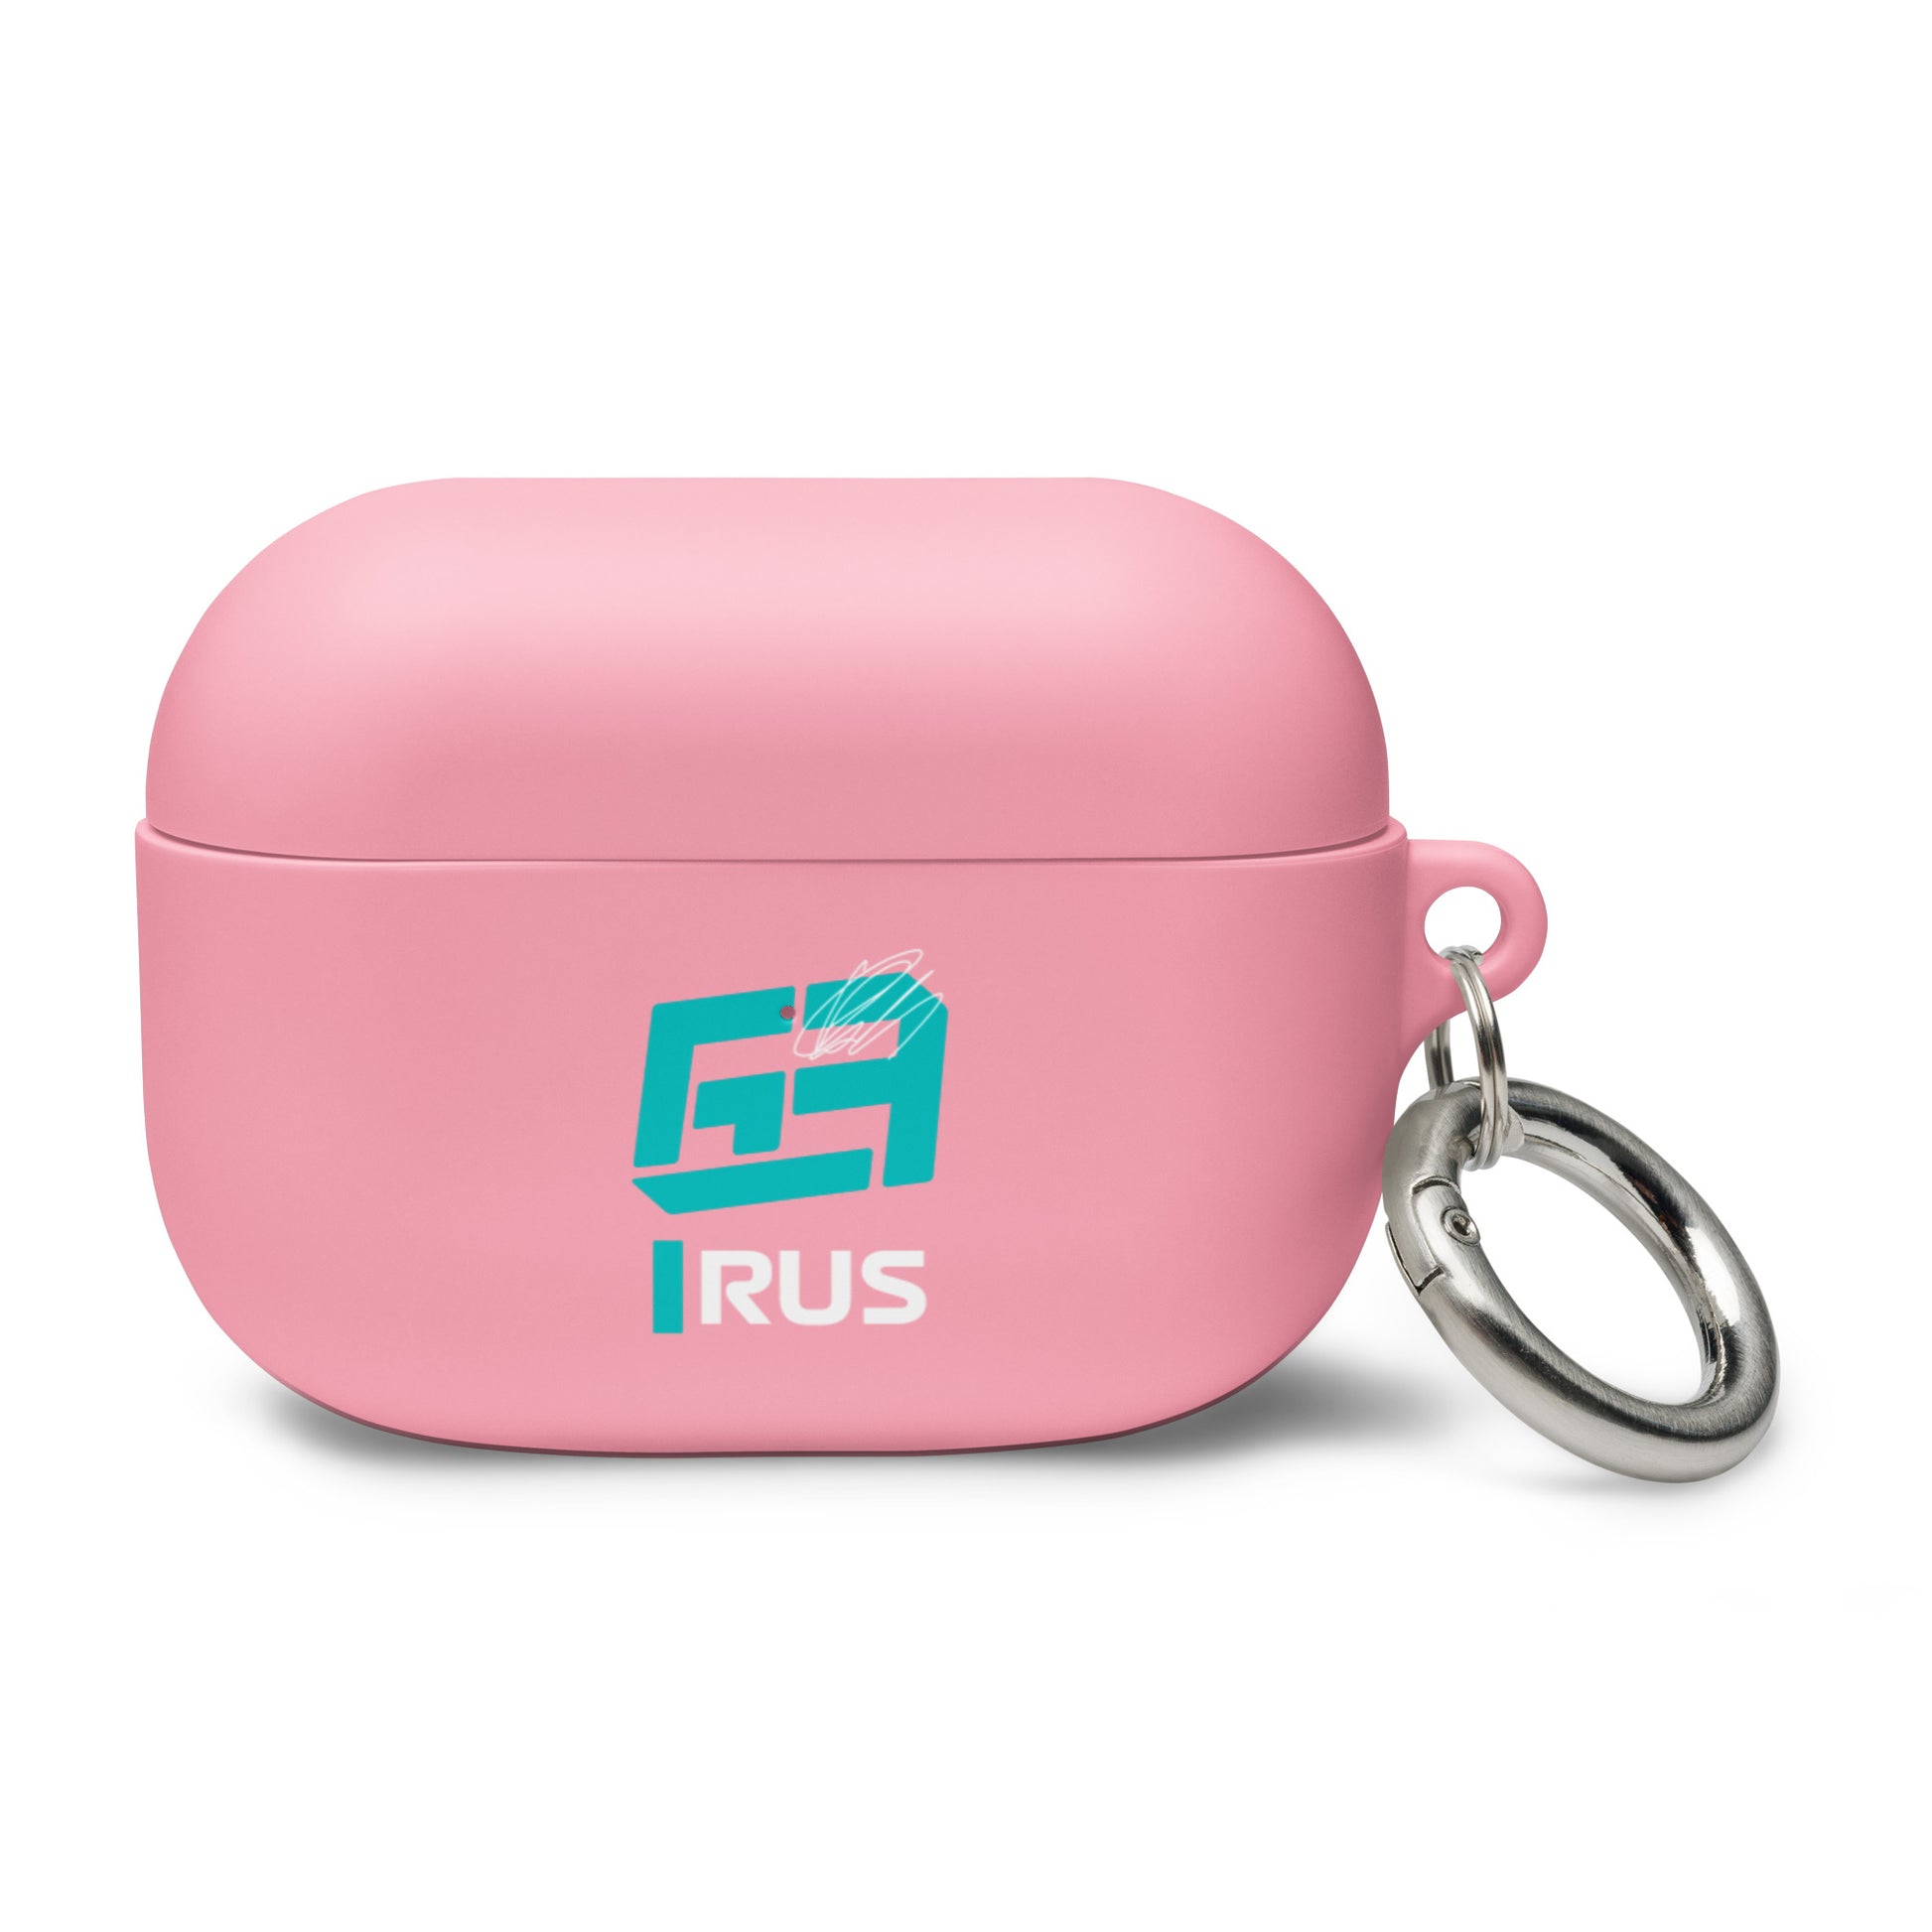 george russell airpods pro case pink